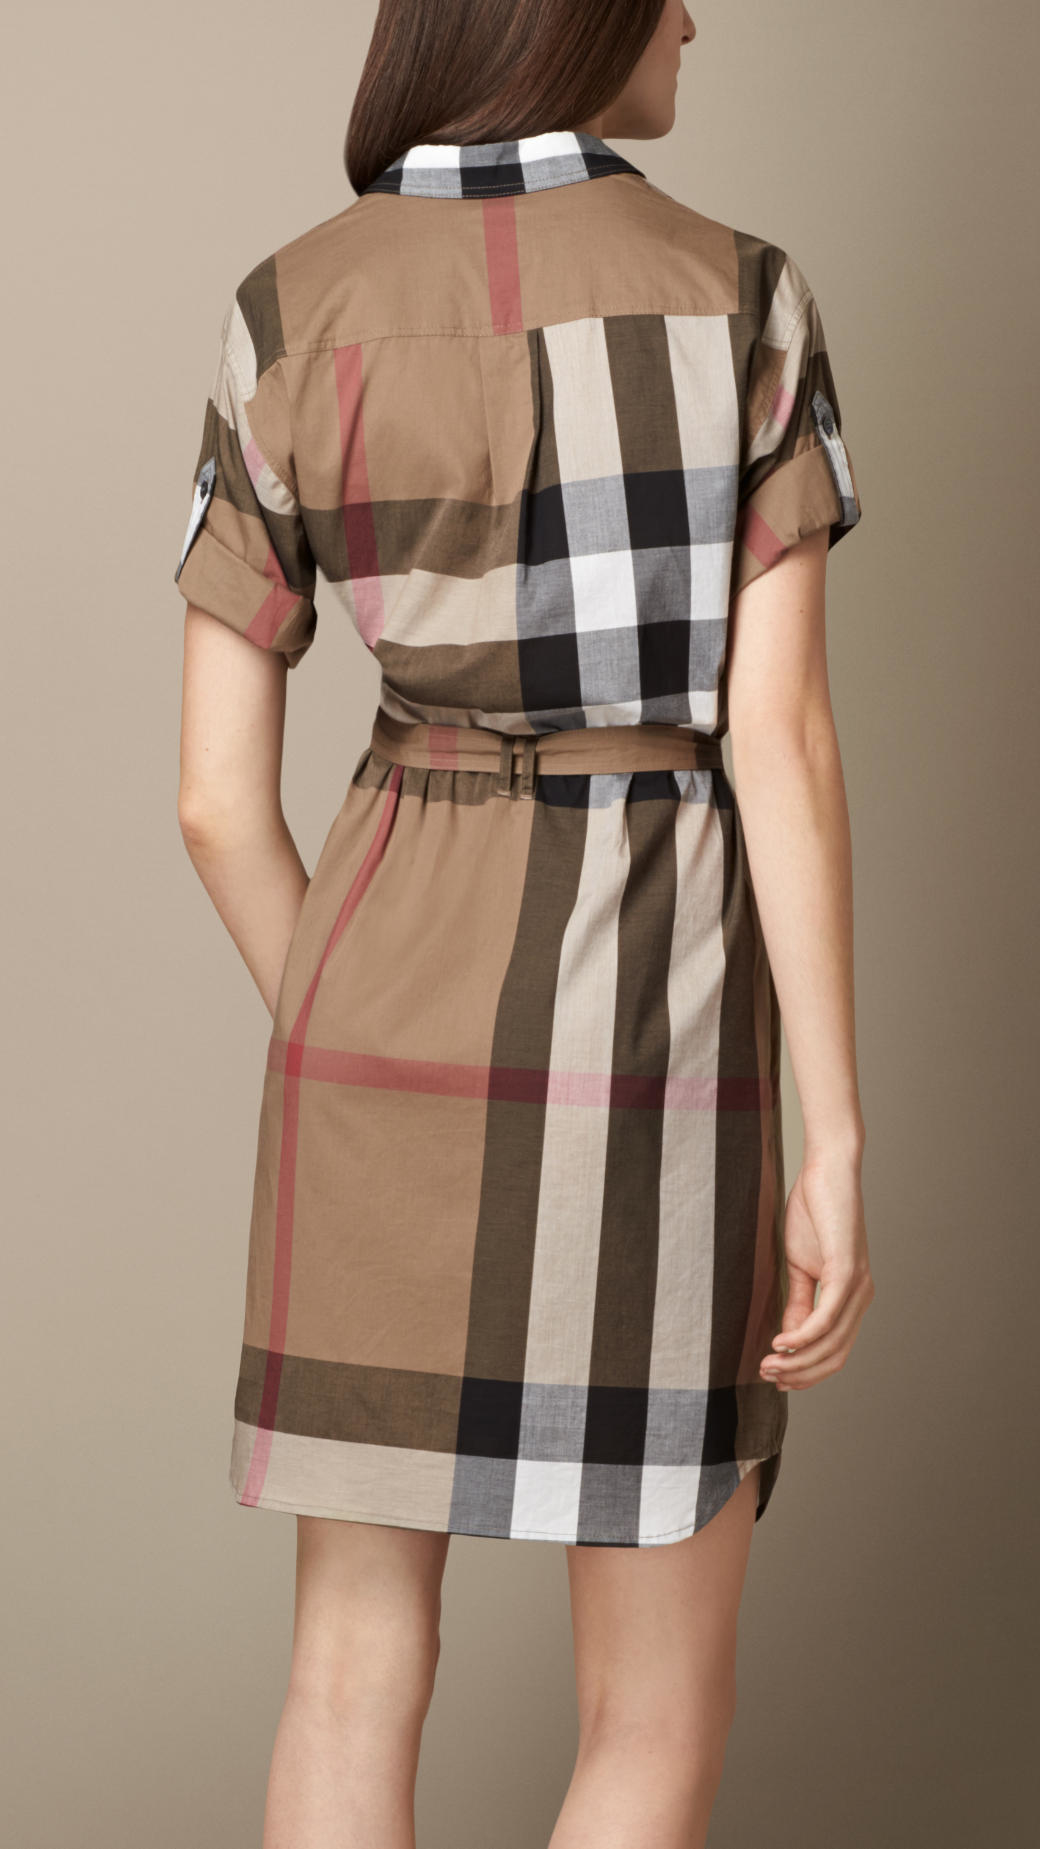 Lyst Burberry  Check Cotton Box fit Shirt  Dress  in Brown